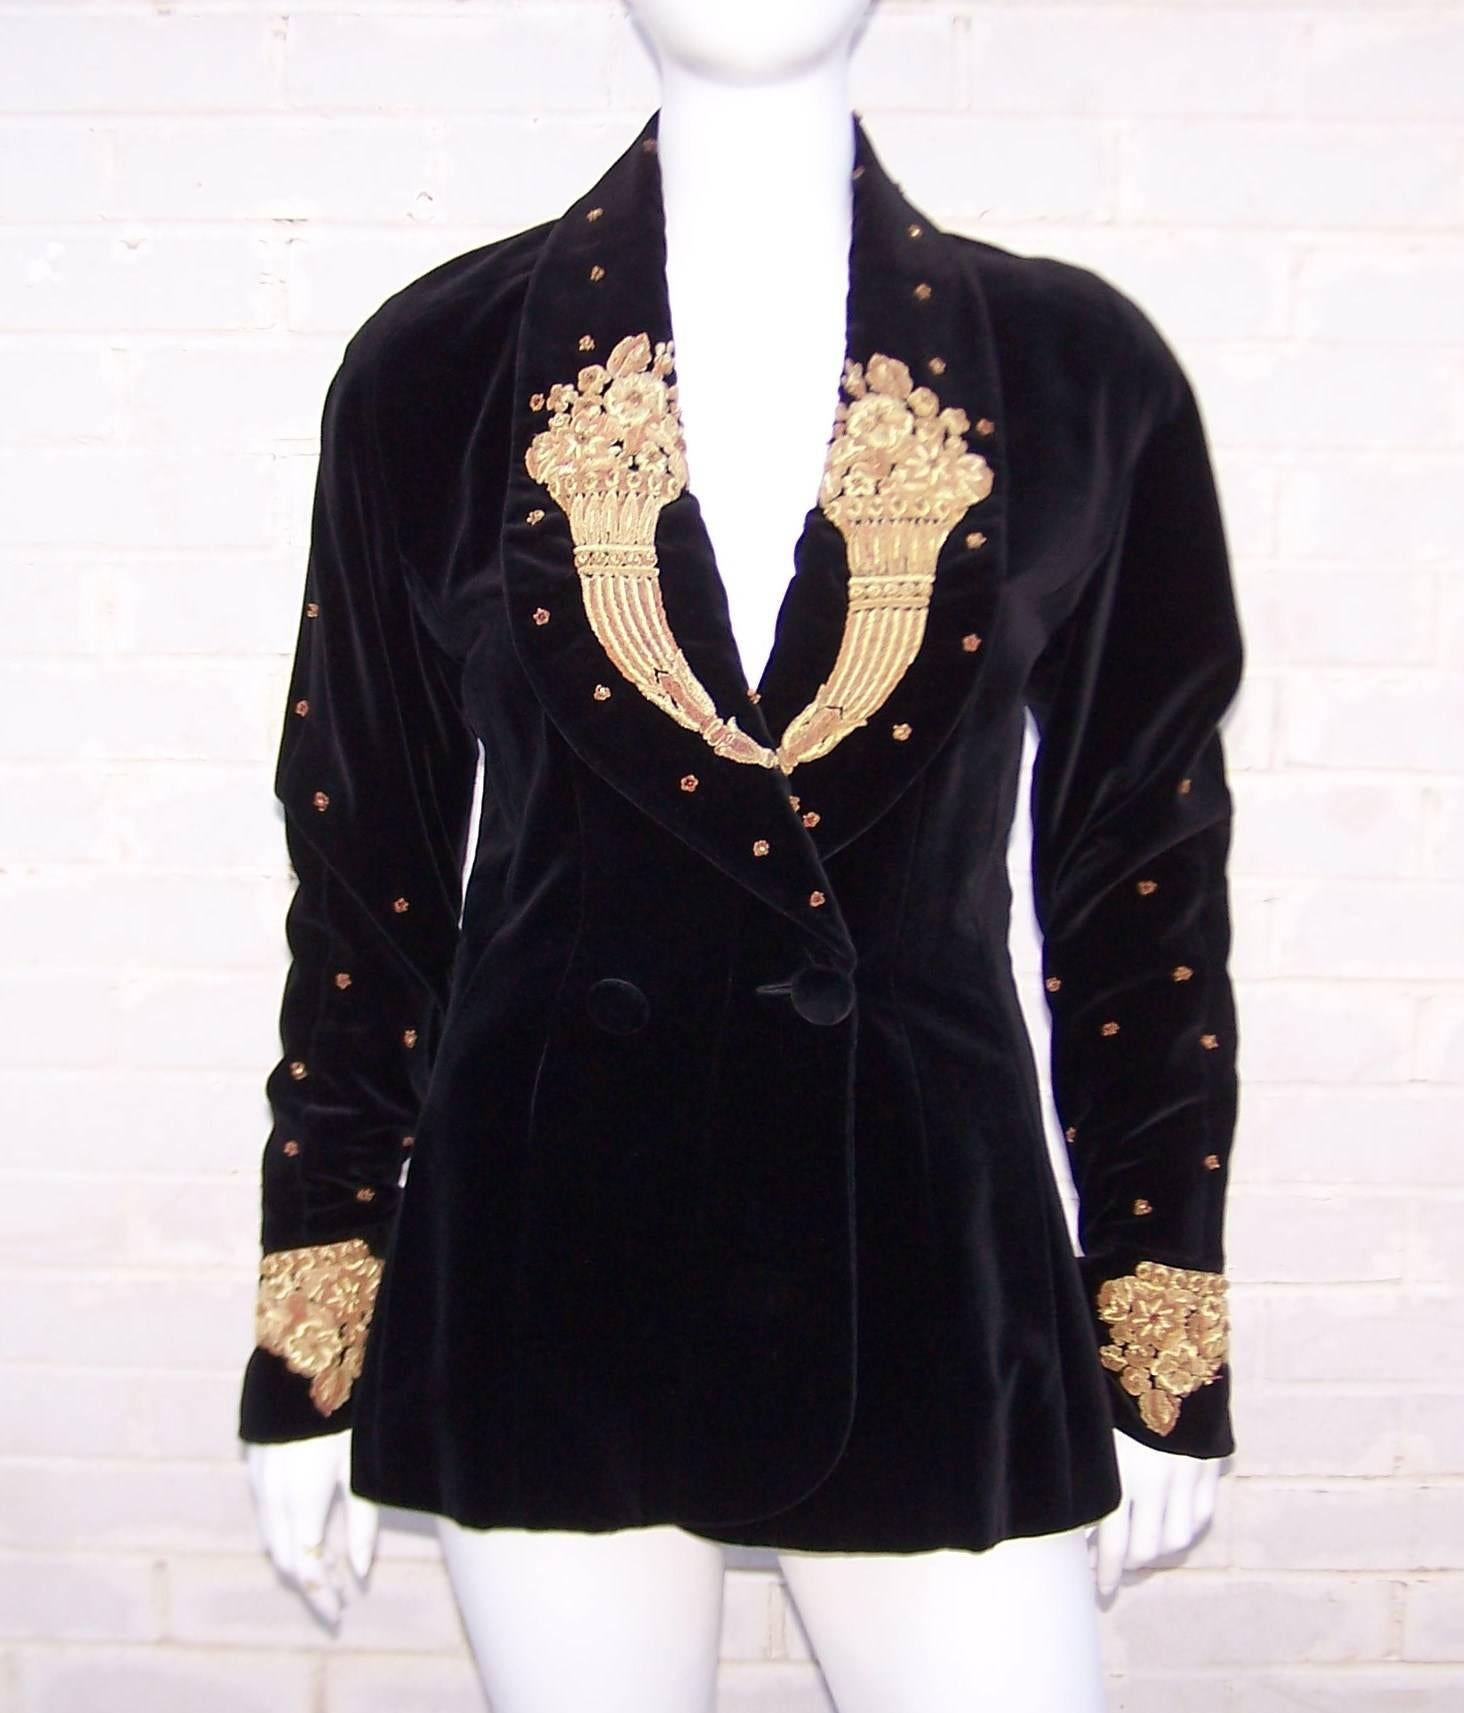 Luxury abounds in this black velvet jacket by Karl Lagerfeld.  The raglan sleeved double breasted construction has a relaxed smoking jacket style complete with front pockets.  The intricate gold braiding accented with ruby red beads adds a rich old